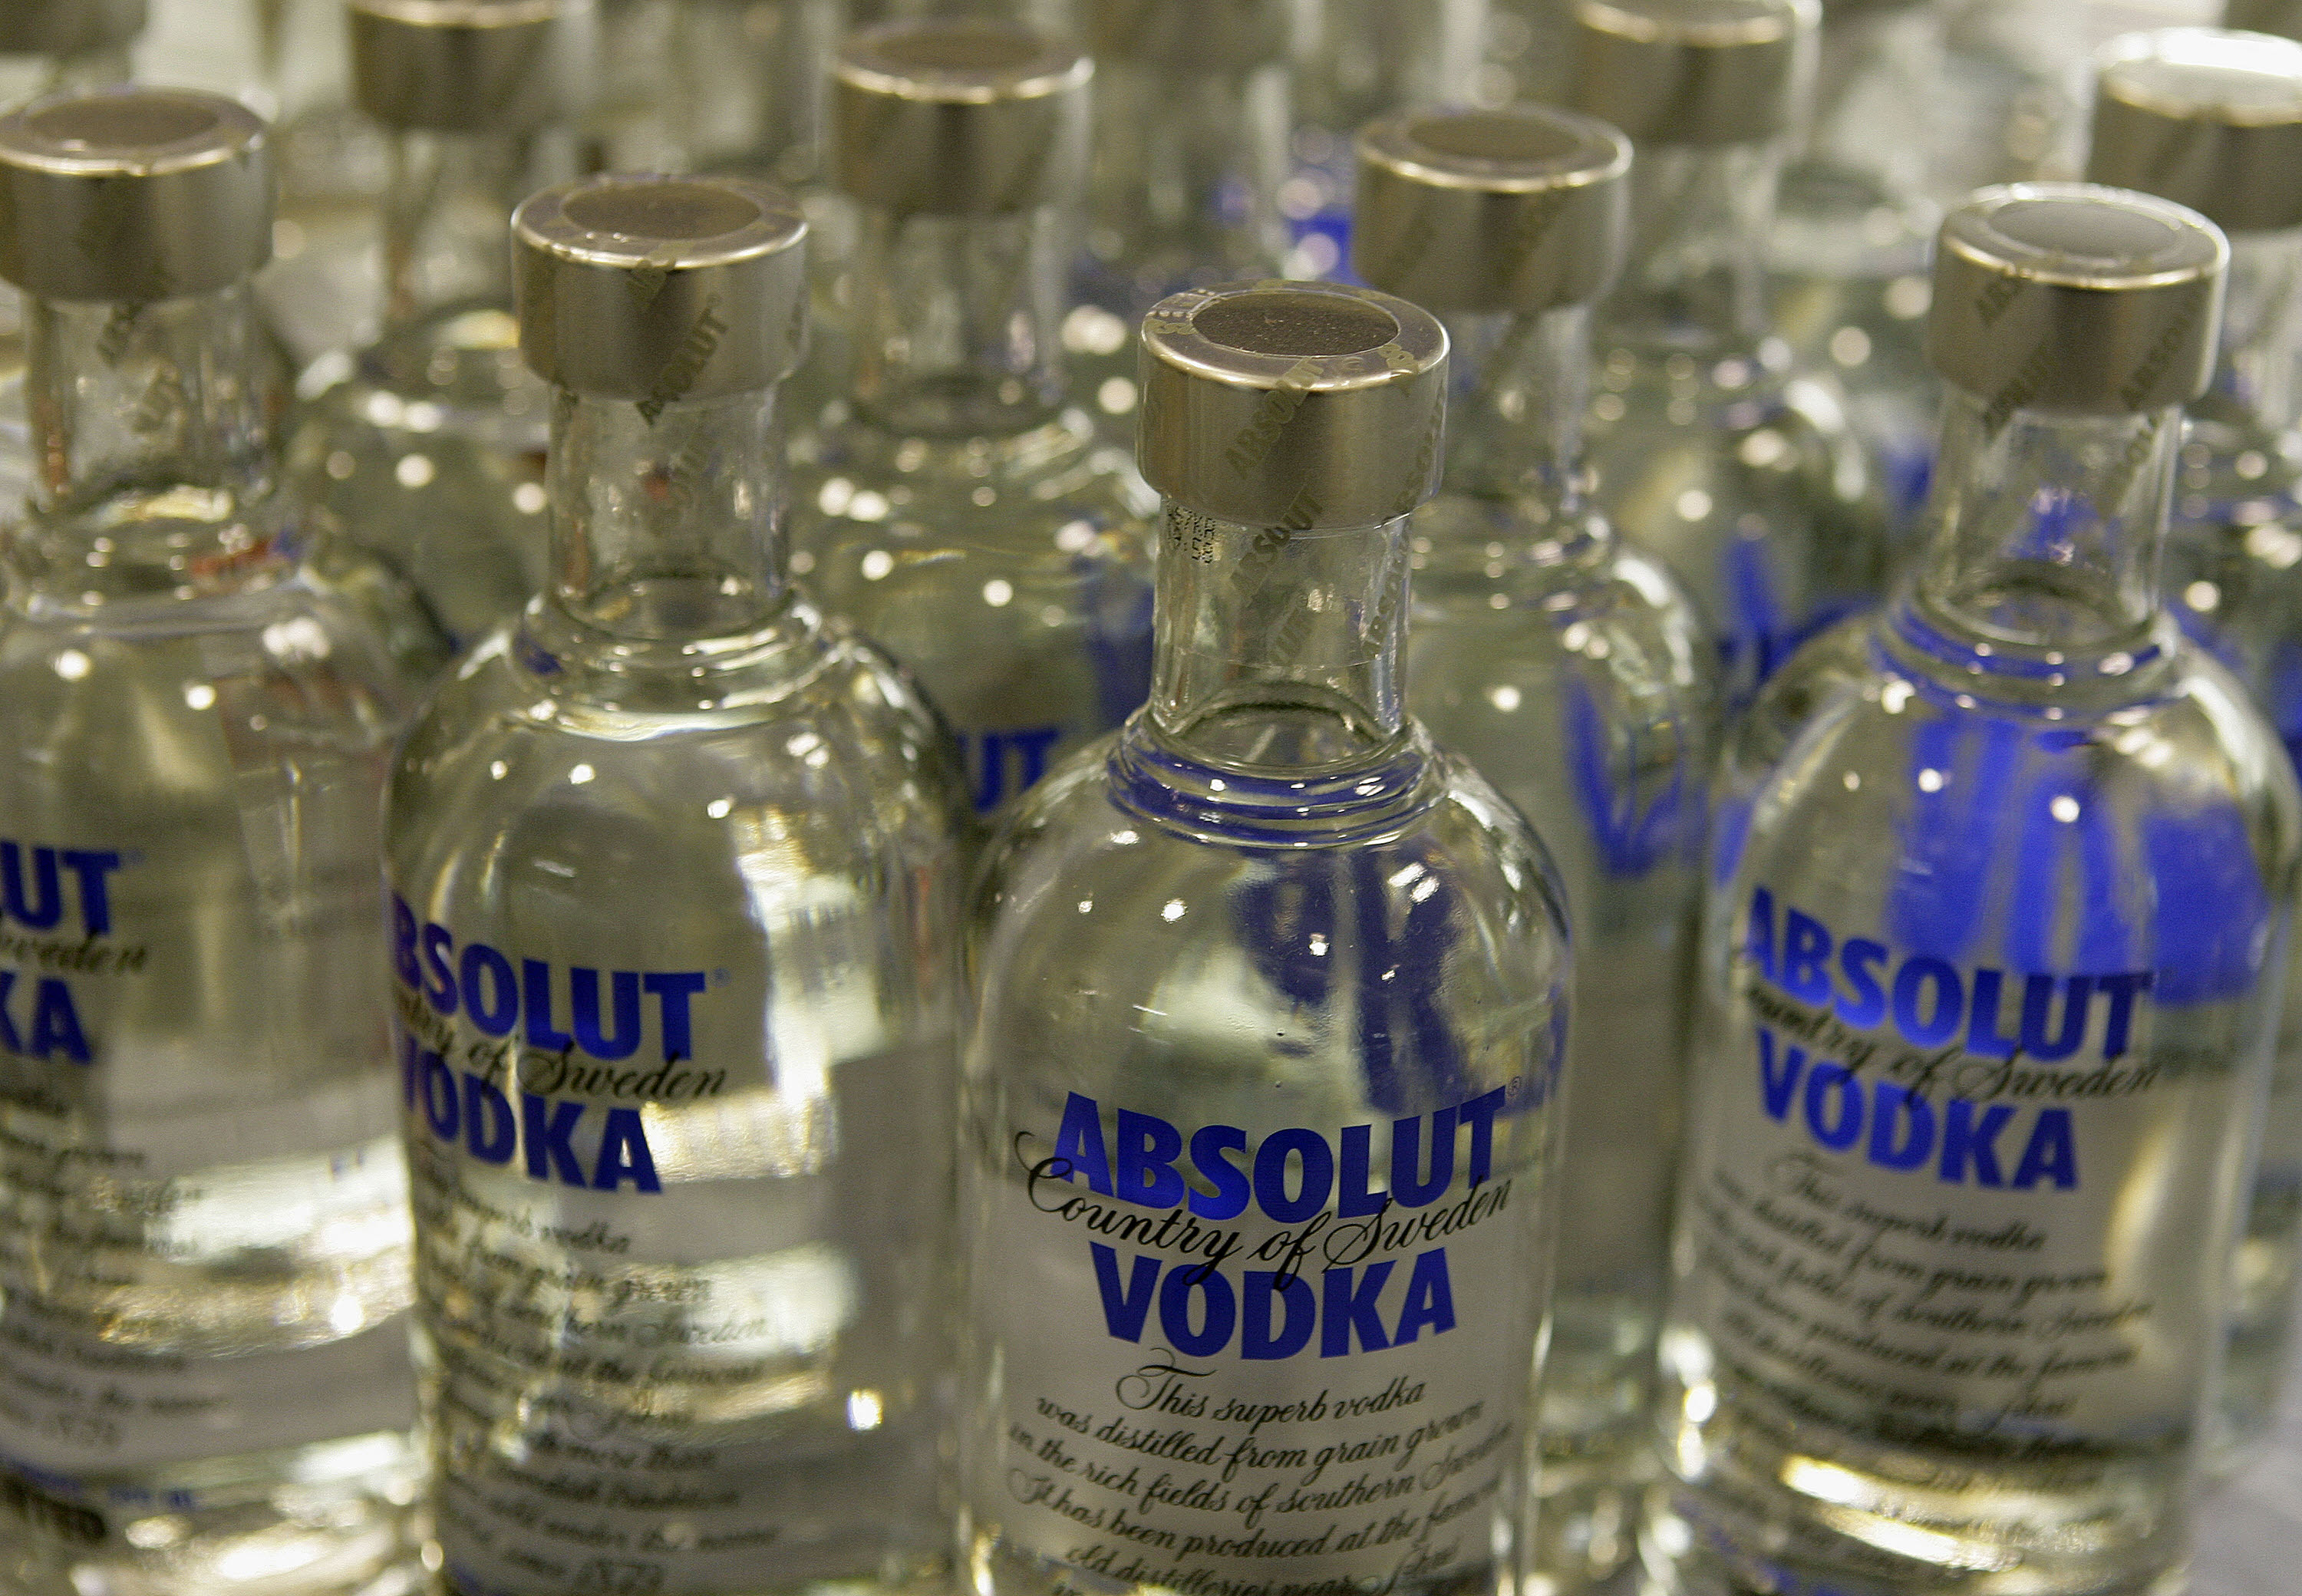 Pernod Ricard to stop Absolut vodka exports to Russia after